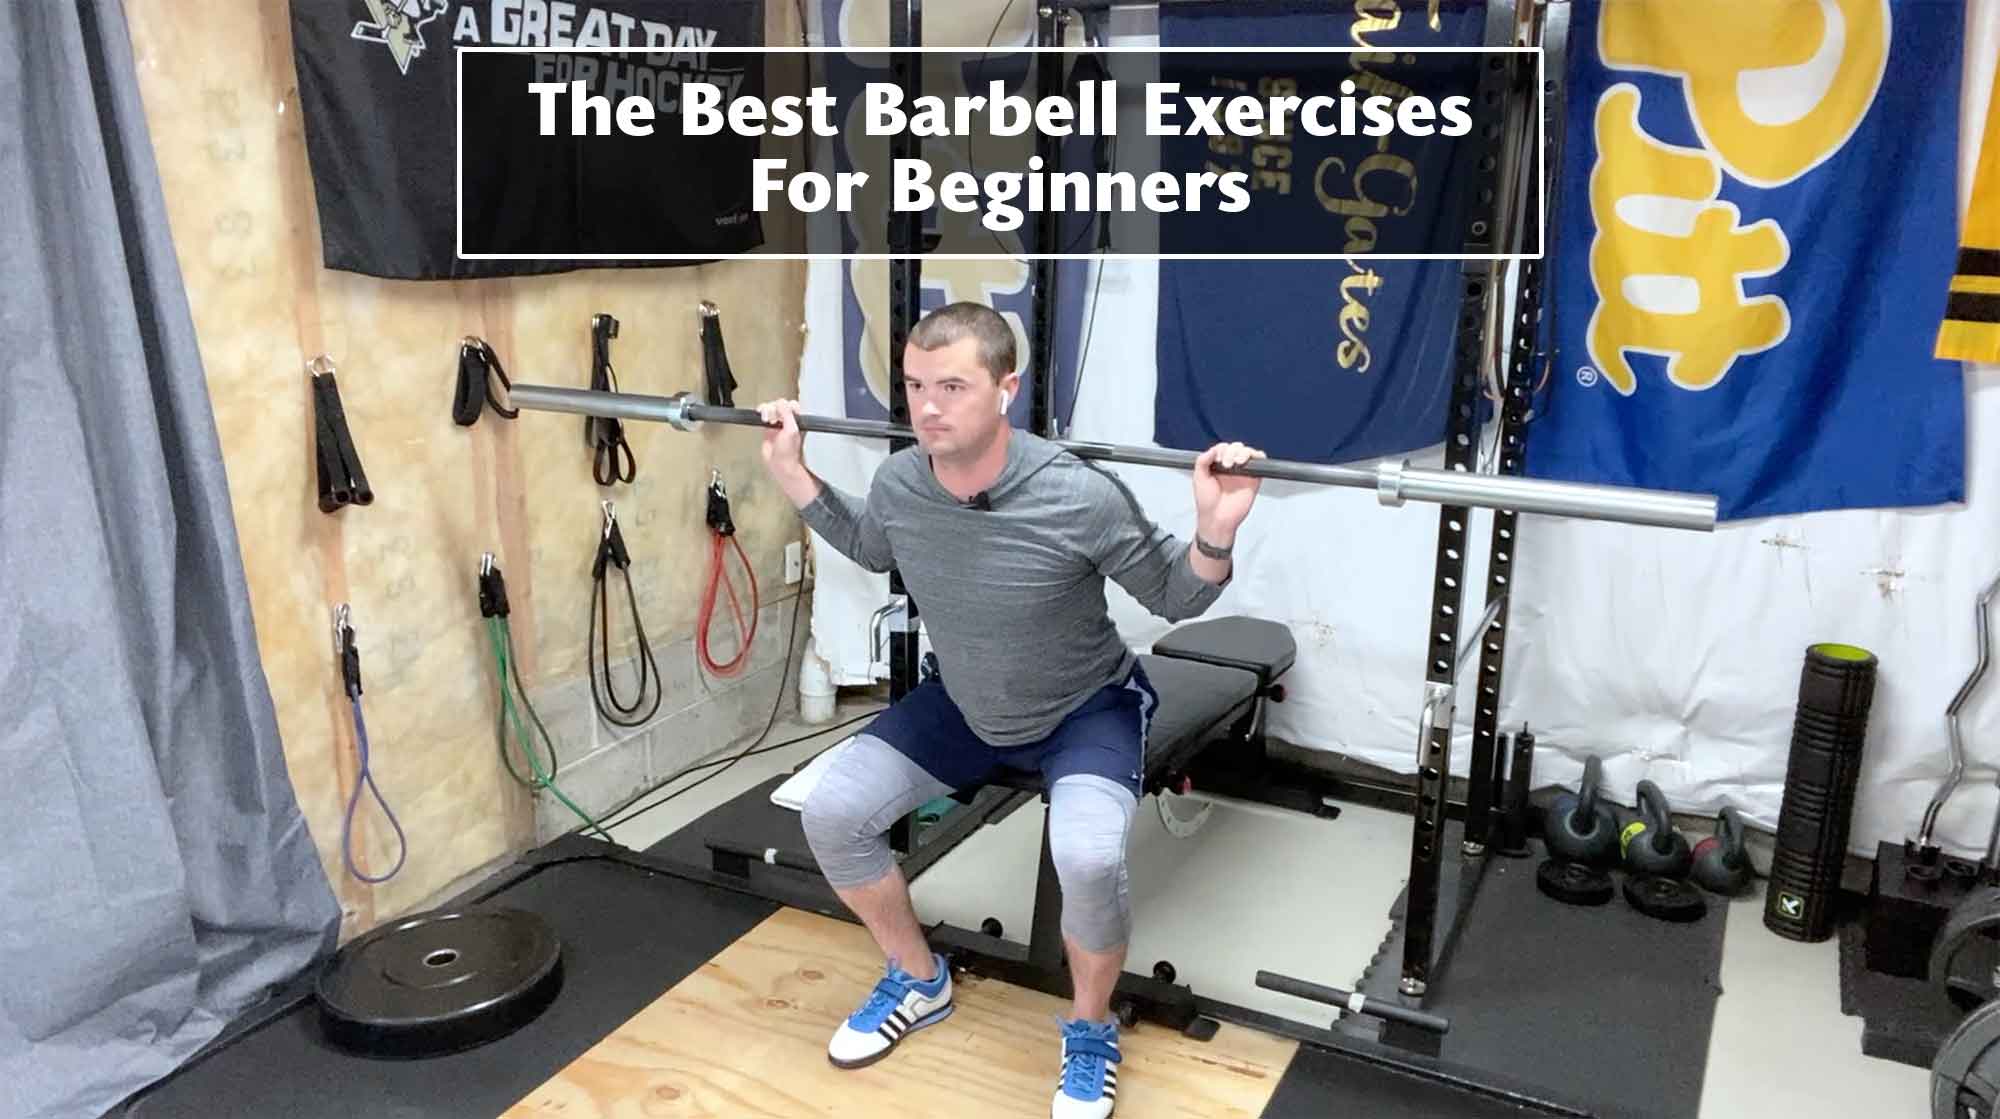 The Best Barbell Exercises For Beginners